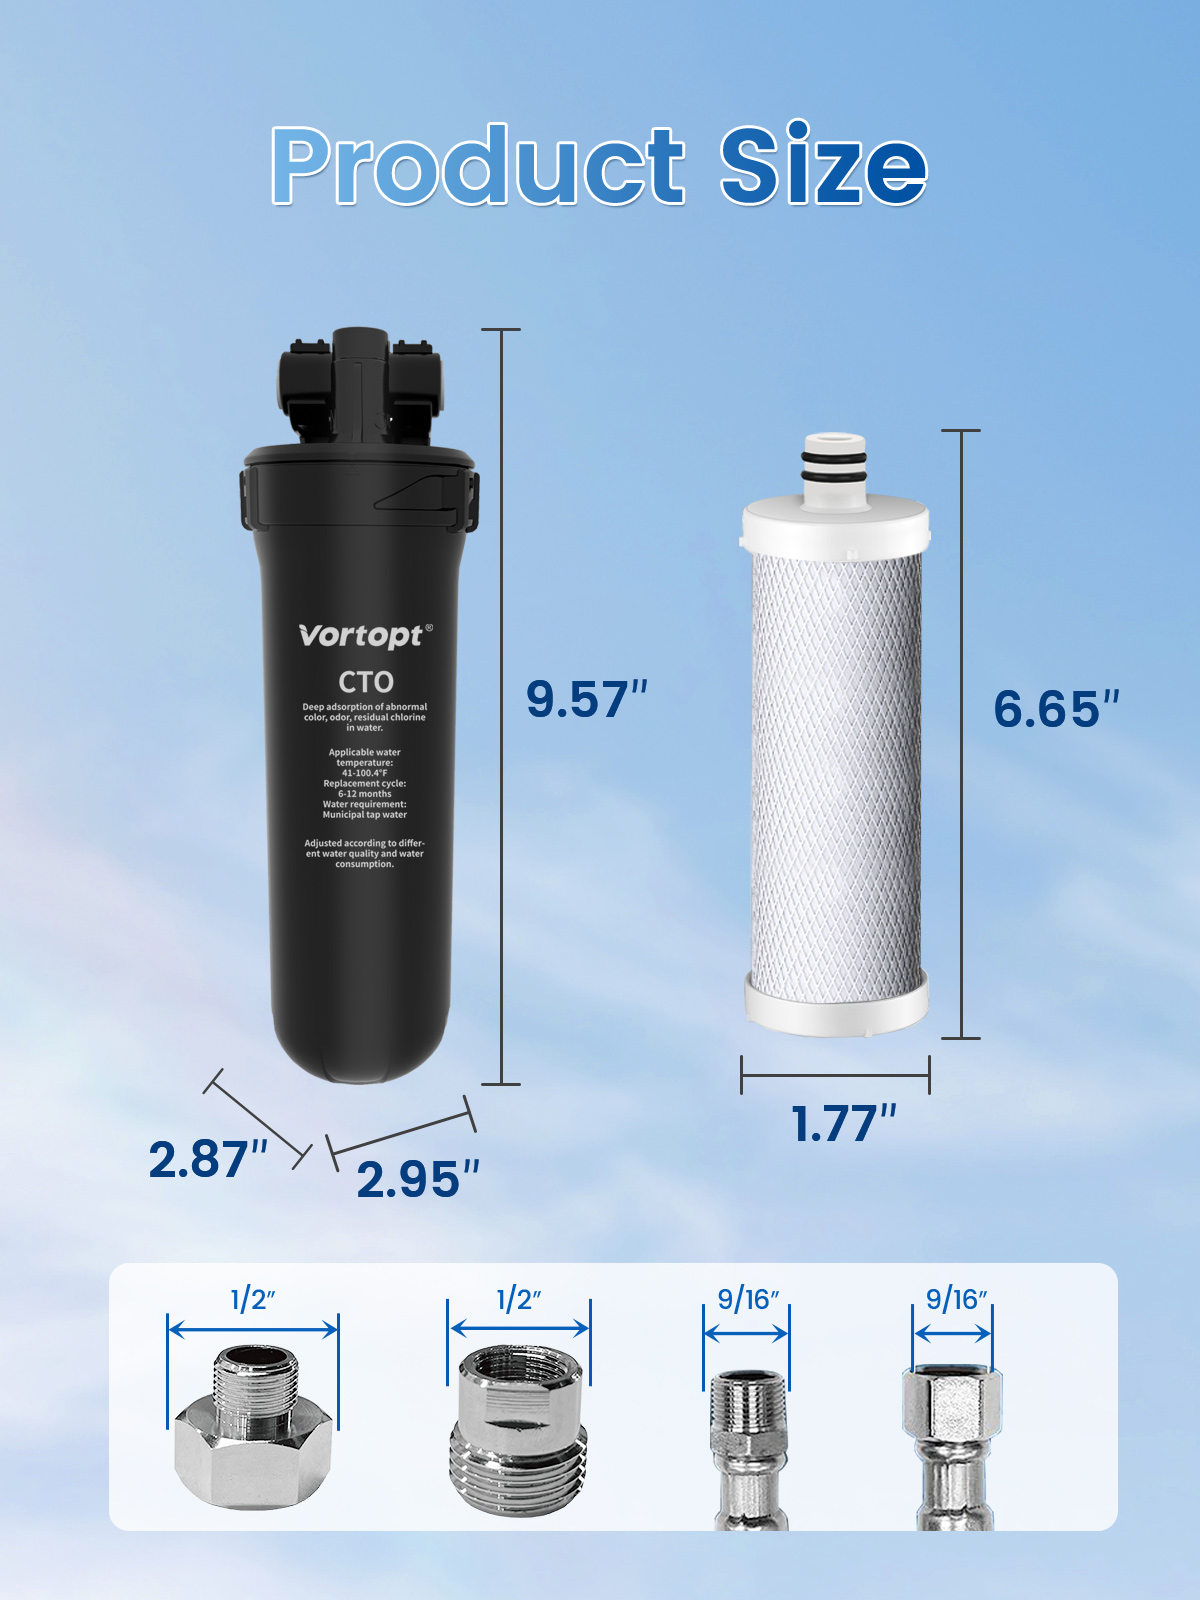 Under Sink Water Filter System - 19K Gallons Reduces Lead, Chlorine, 304 Stainless Steel Faucet, Q8-C1 (2 Filters)